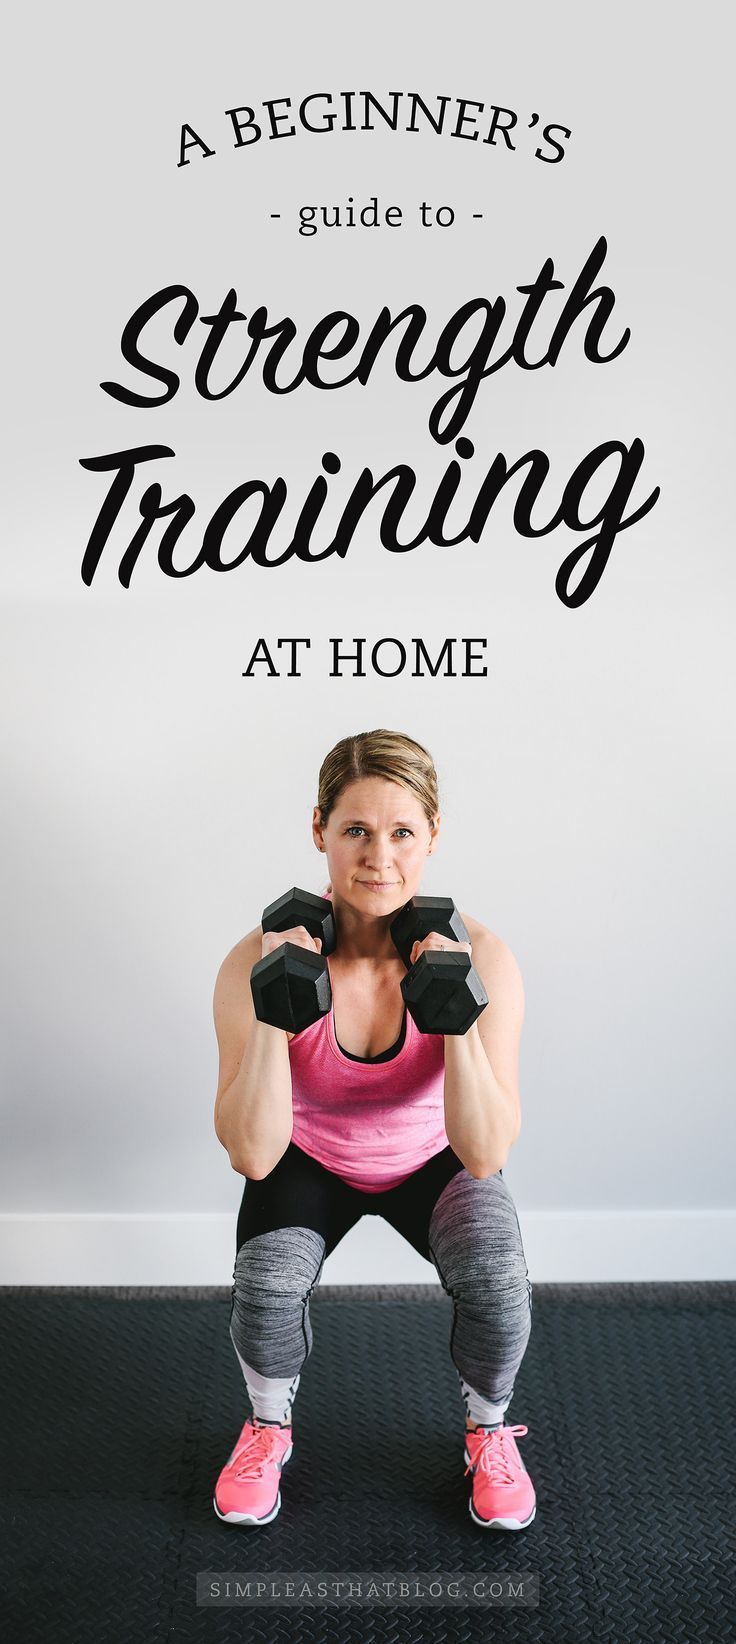 A Beginner’s Guide to Strength Training at Home -   21 fitness at training
 ideas